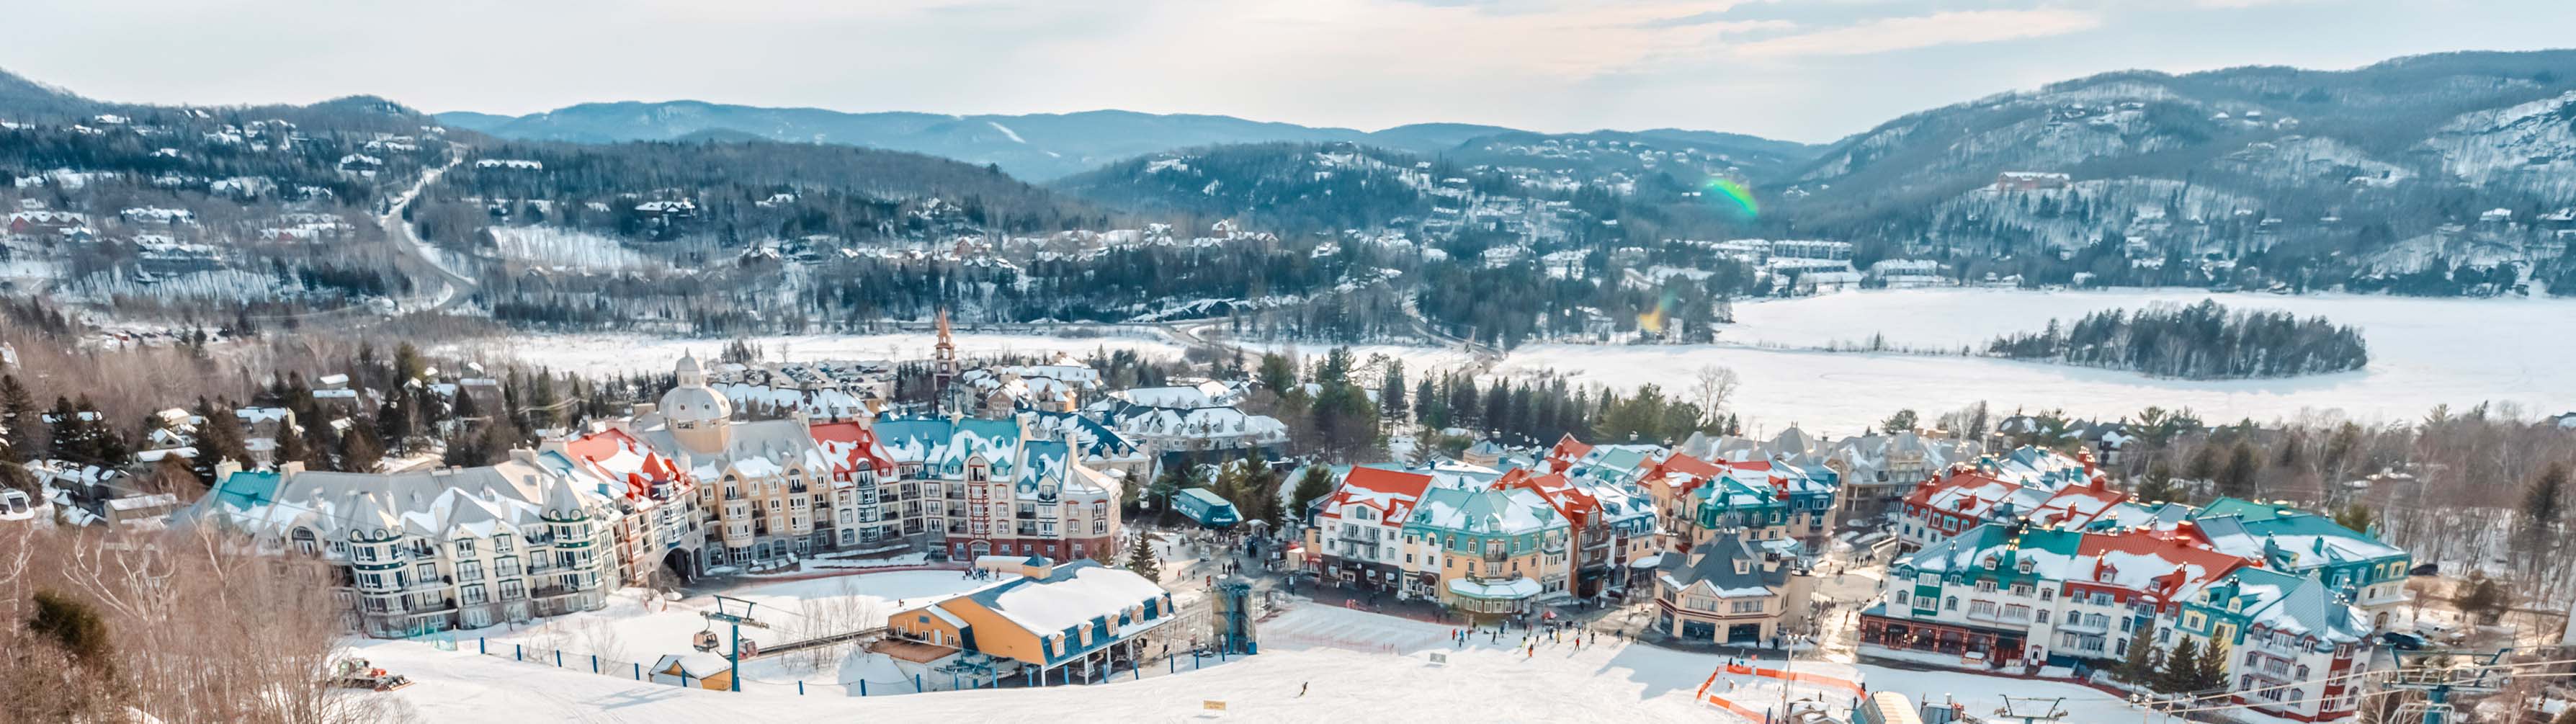 The colorful chalets of Mont Tremblant sit in snow-filled valleys.